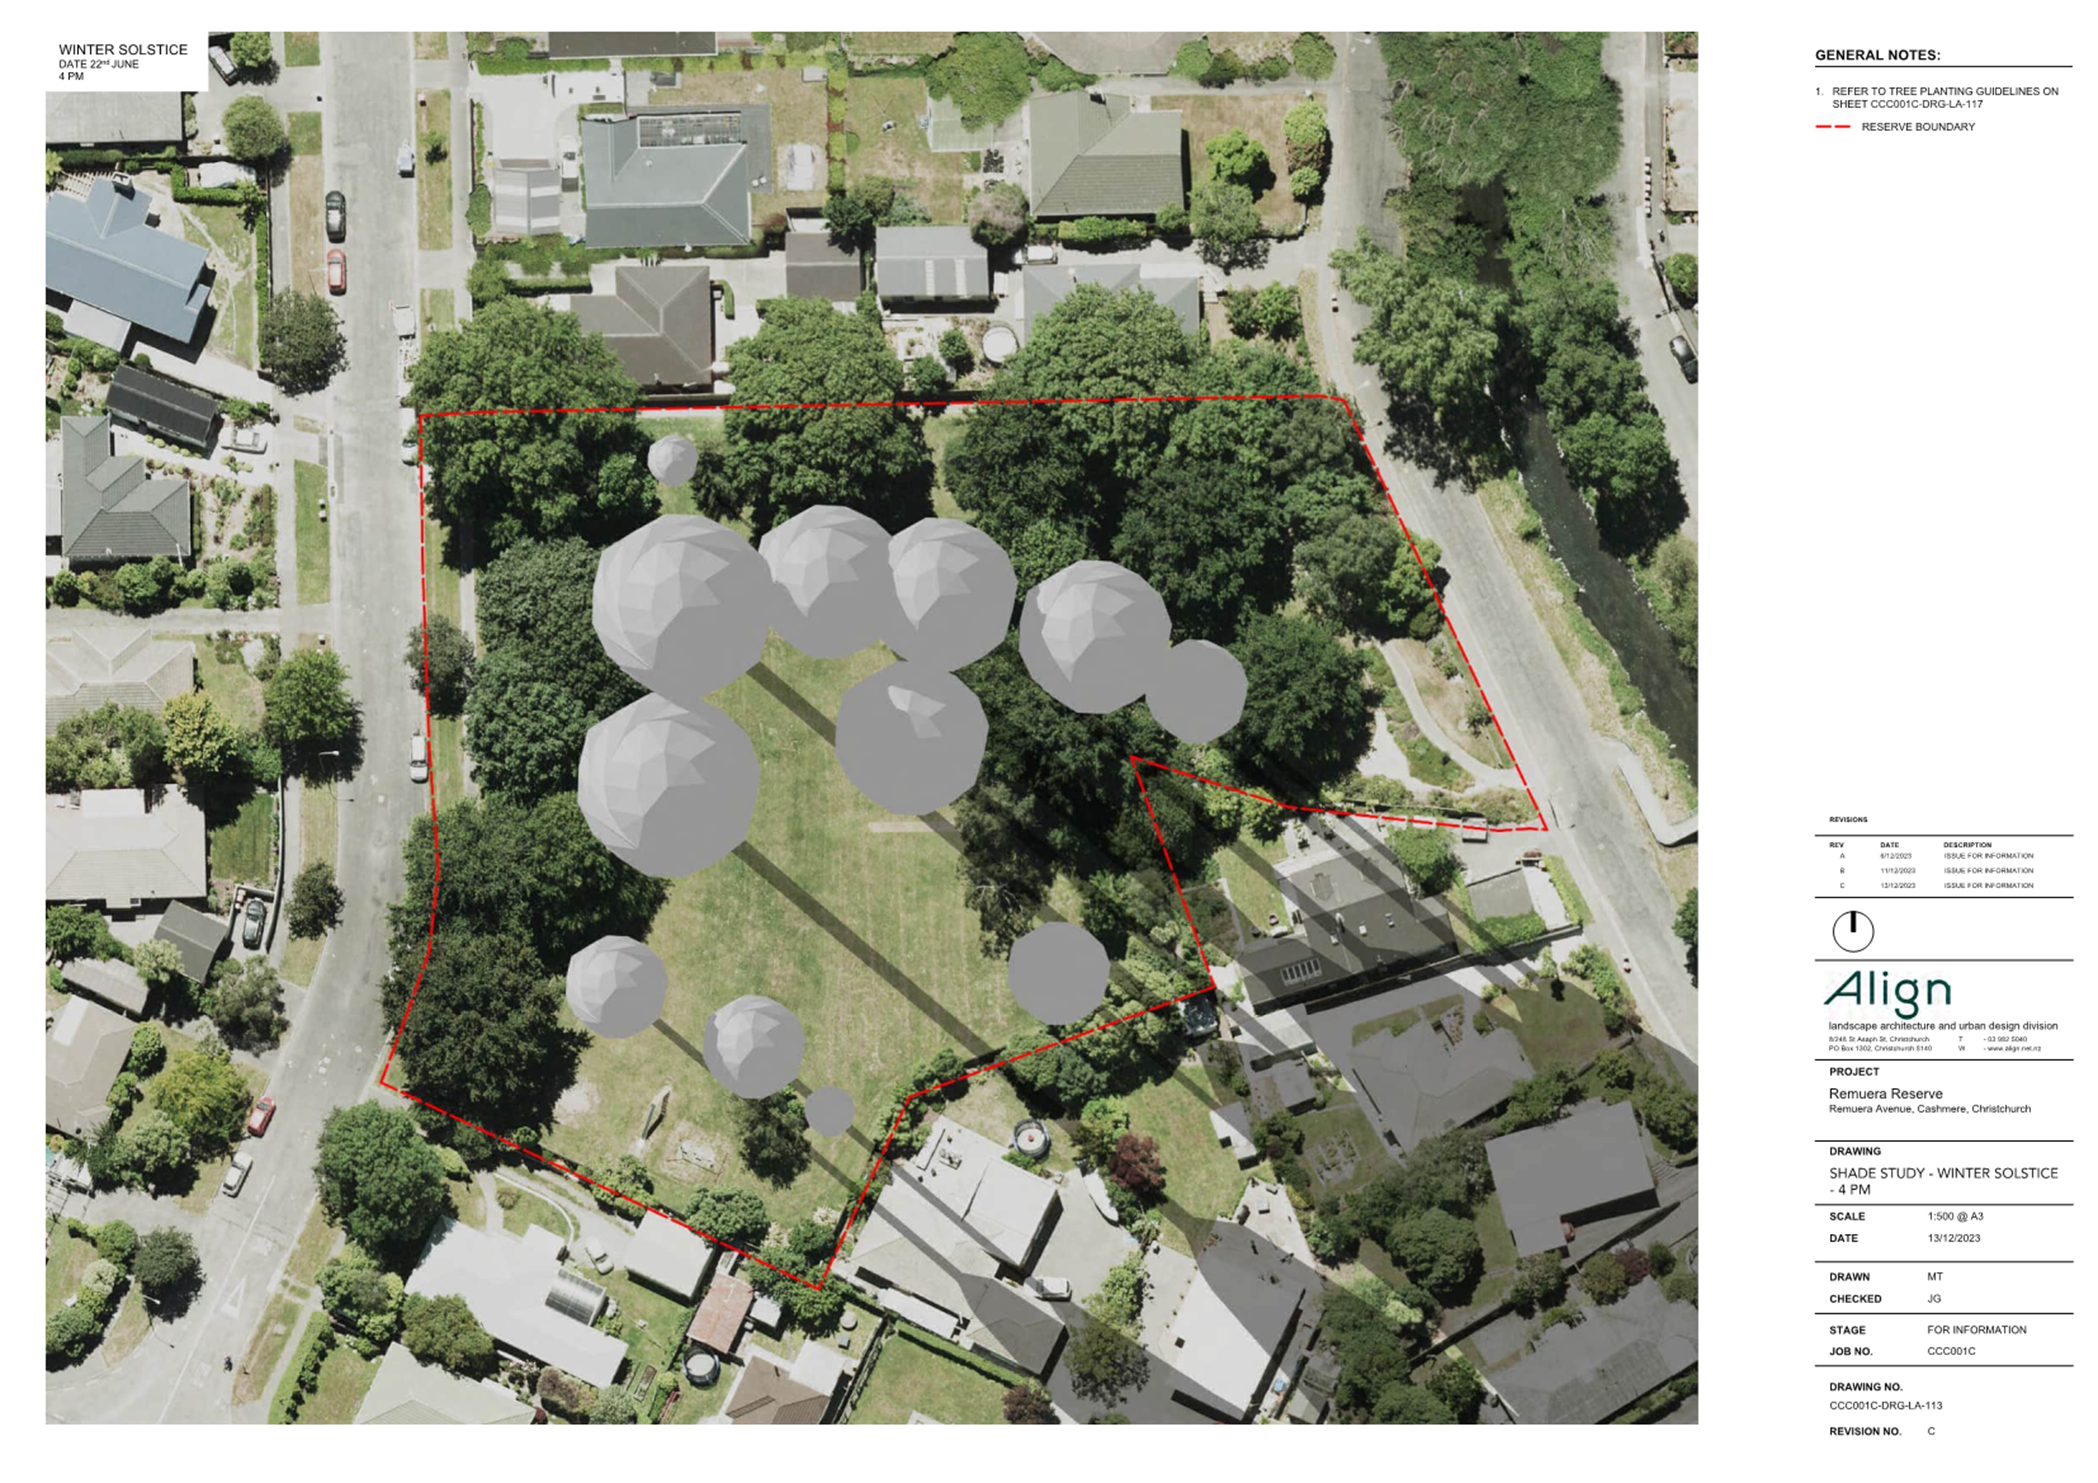 A aerial view of a neighborhood

Description automatically generated